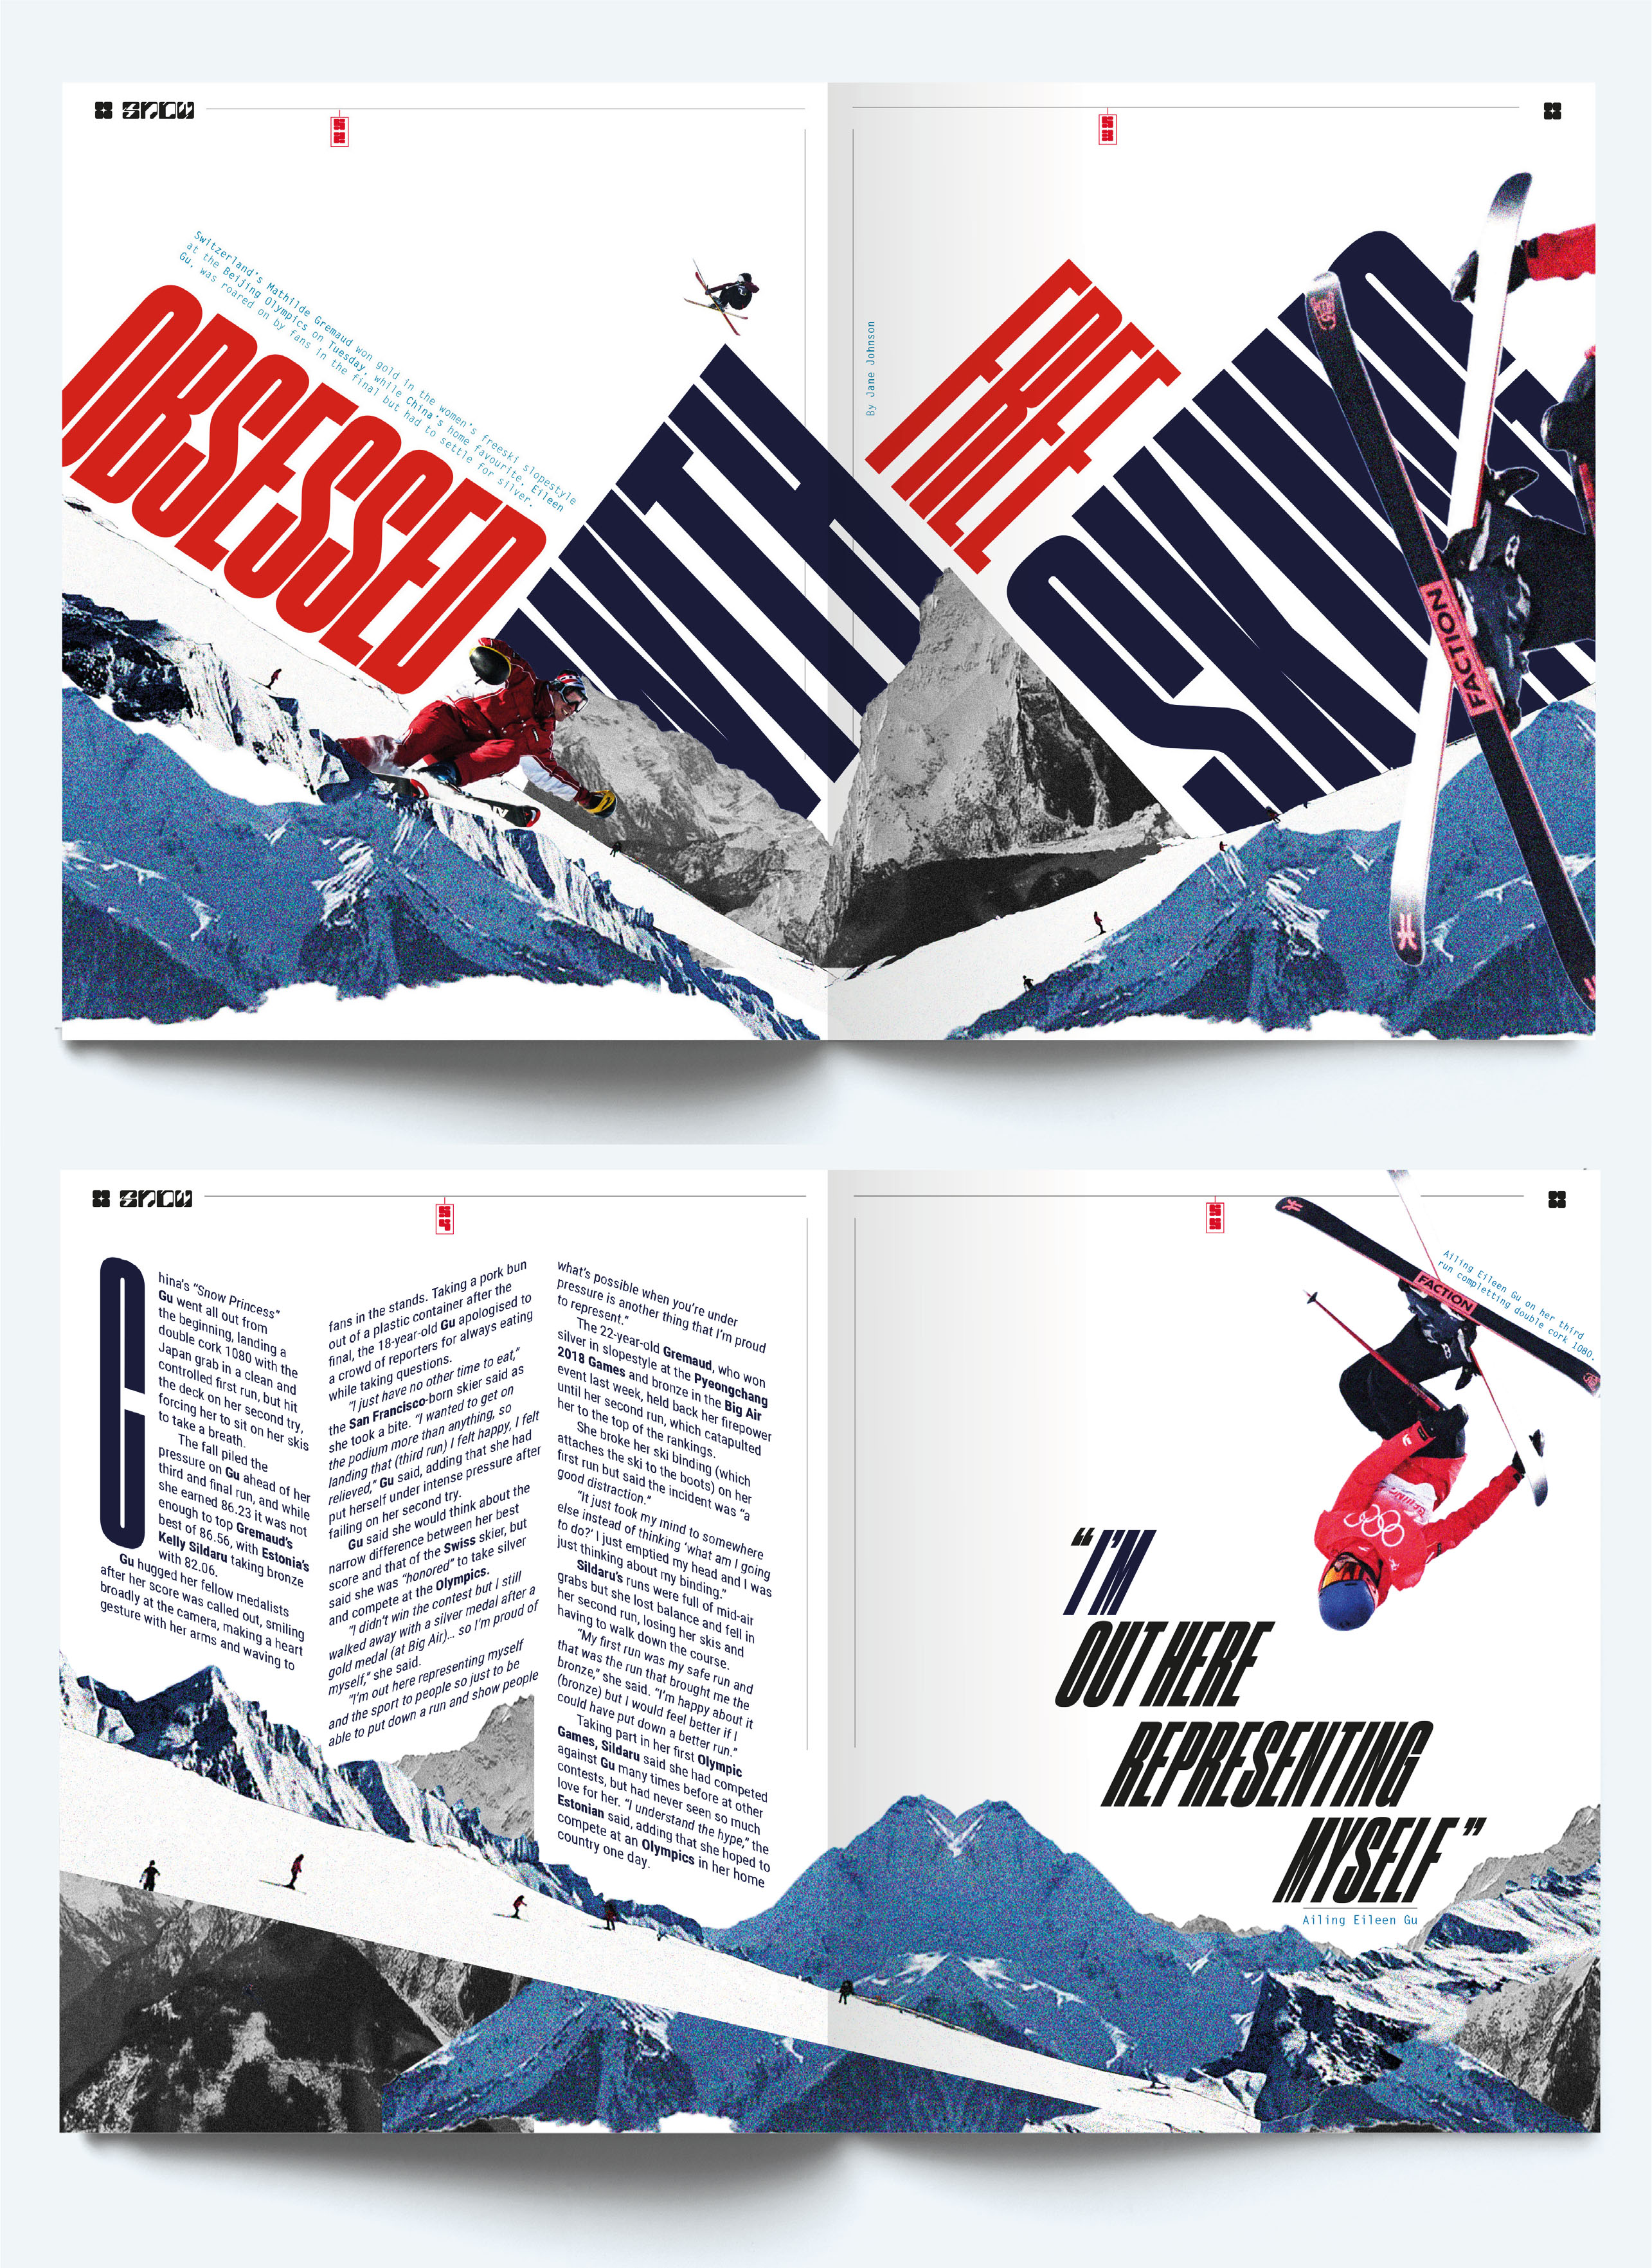 Editorial sequence about free skiing images and text are set at different angles to represent the slopes.